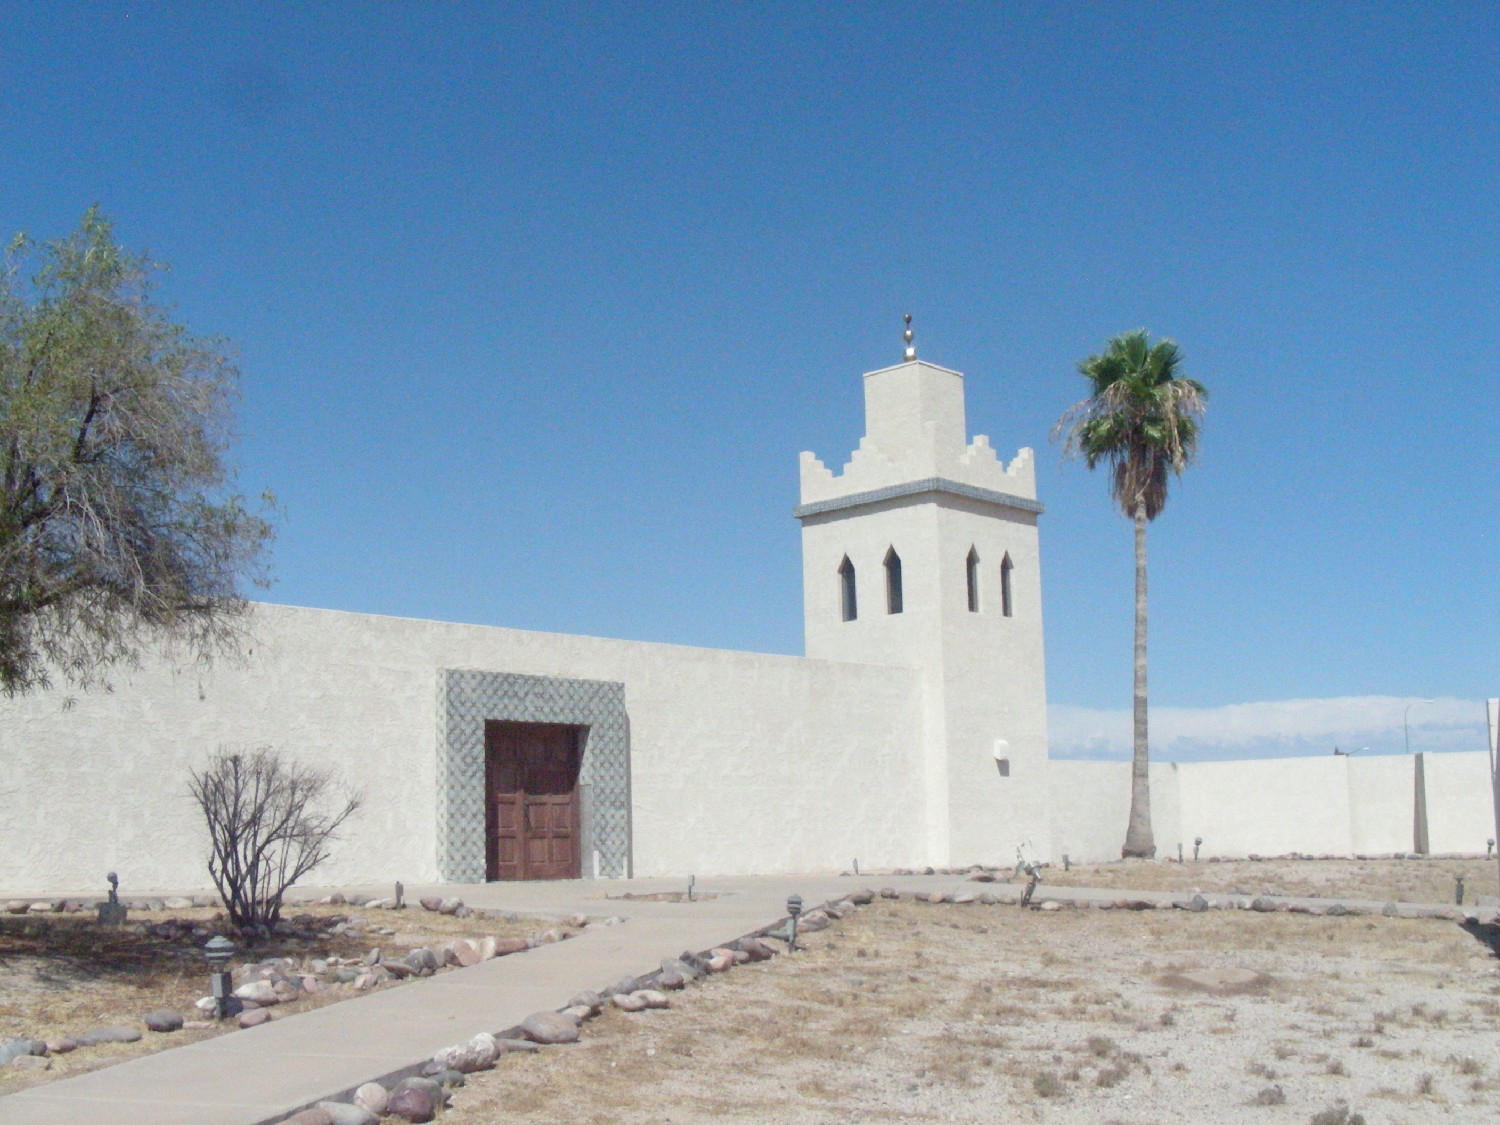 View of entrance and minaret